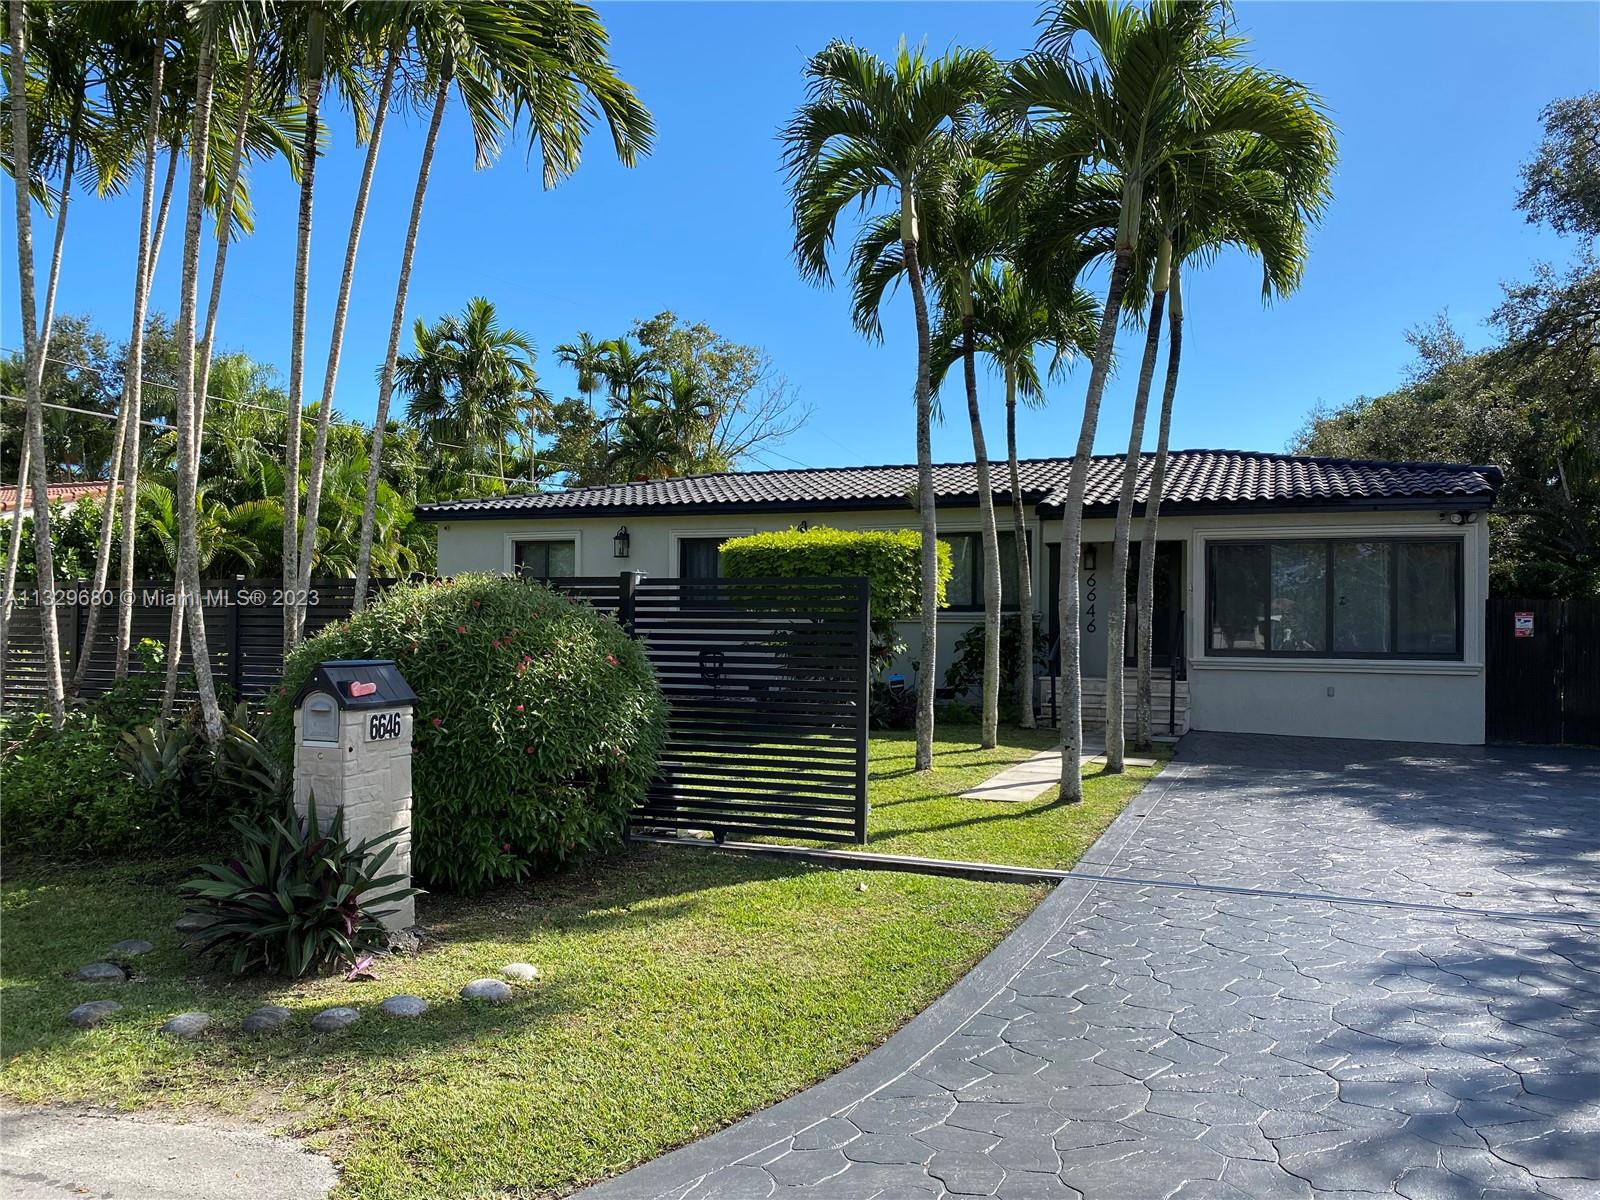 South Miami. Corner. Natural Light throughout home. Open concept layout. 3 bdrm 2 bath. lot size 11,264. Impact windows and doors, 2020. Aluminum fence w remote gate, 2021. Barrel tile roof. 2023 central ac (waiting for permit). Freshly painted indoors and driveway. Refinished wood floors, 2023. Extra office space/ inlaws/ family room separate entrance. Sprinkler well water.   All permitted with South Miami. Septic tank cleaned 2020. Fruit trees & Oak tree. Separate gates within property to store toy vehicles. Possibilities for pool. Top rated schools across street all walking distance (a parents' dream). Palmer's park feet away. Girl Scouts South Miami Little house across the street. 5 minutes from UM, entertainment, dining, medical services, and public transportation. Owner Broker.